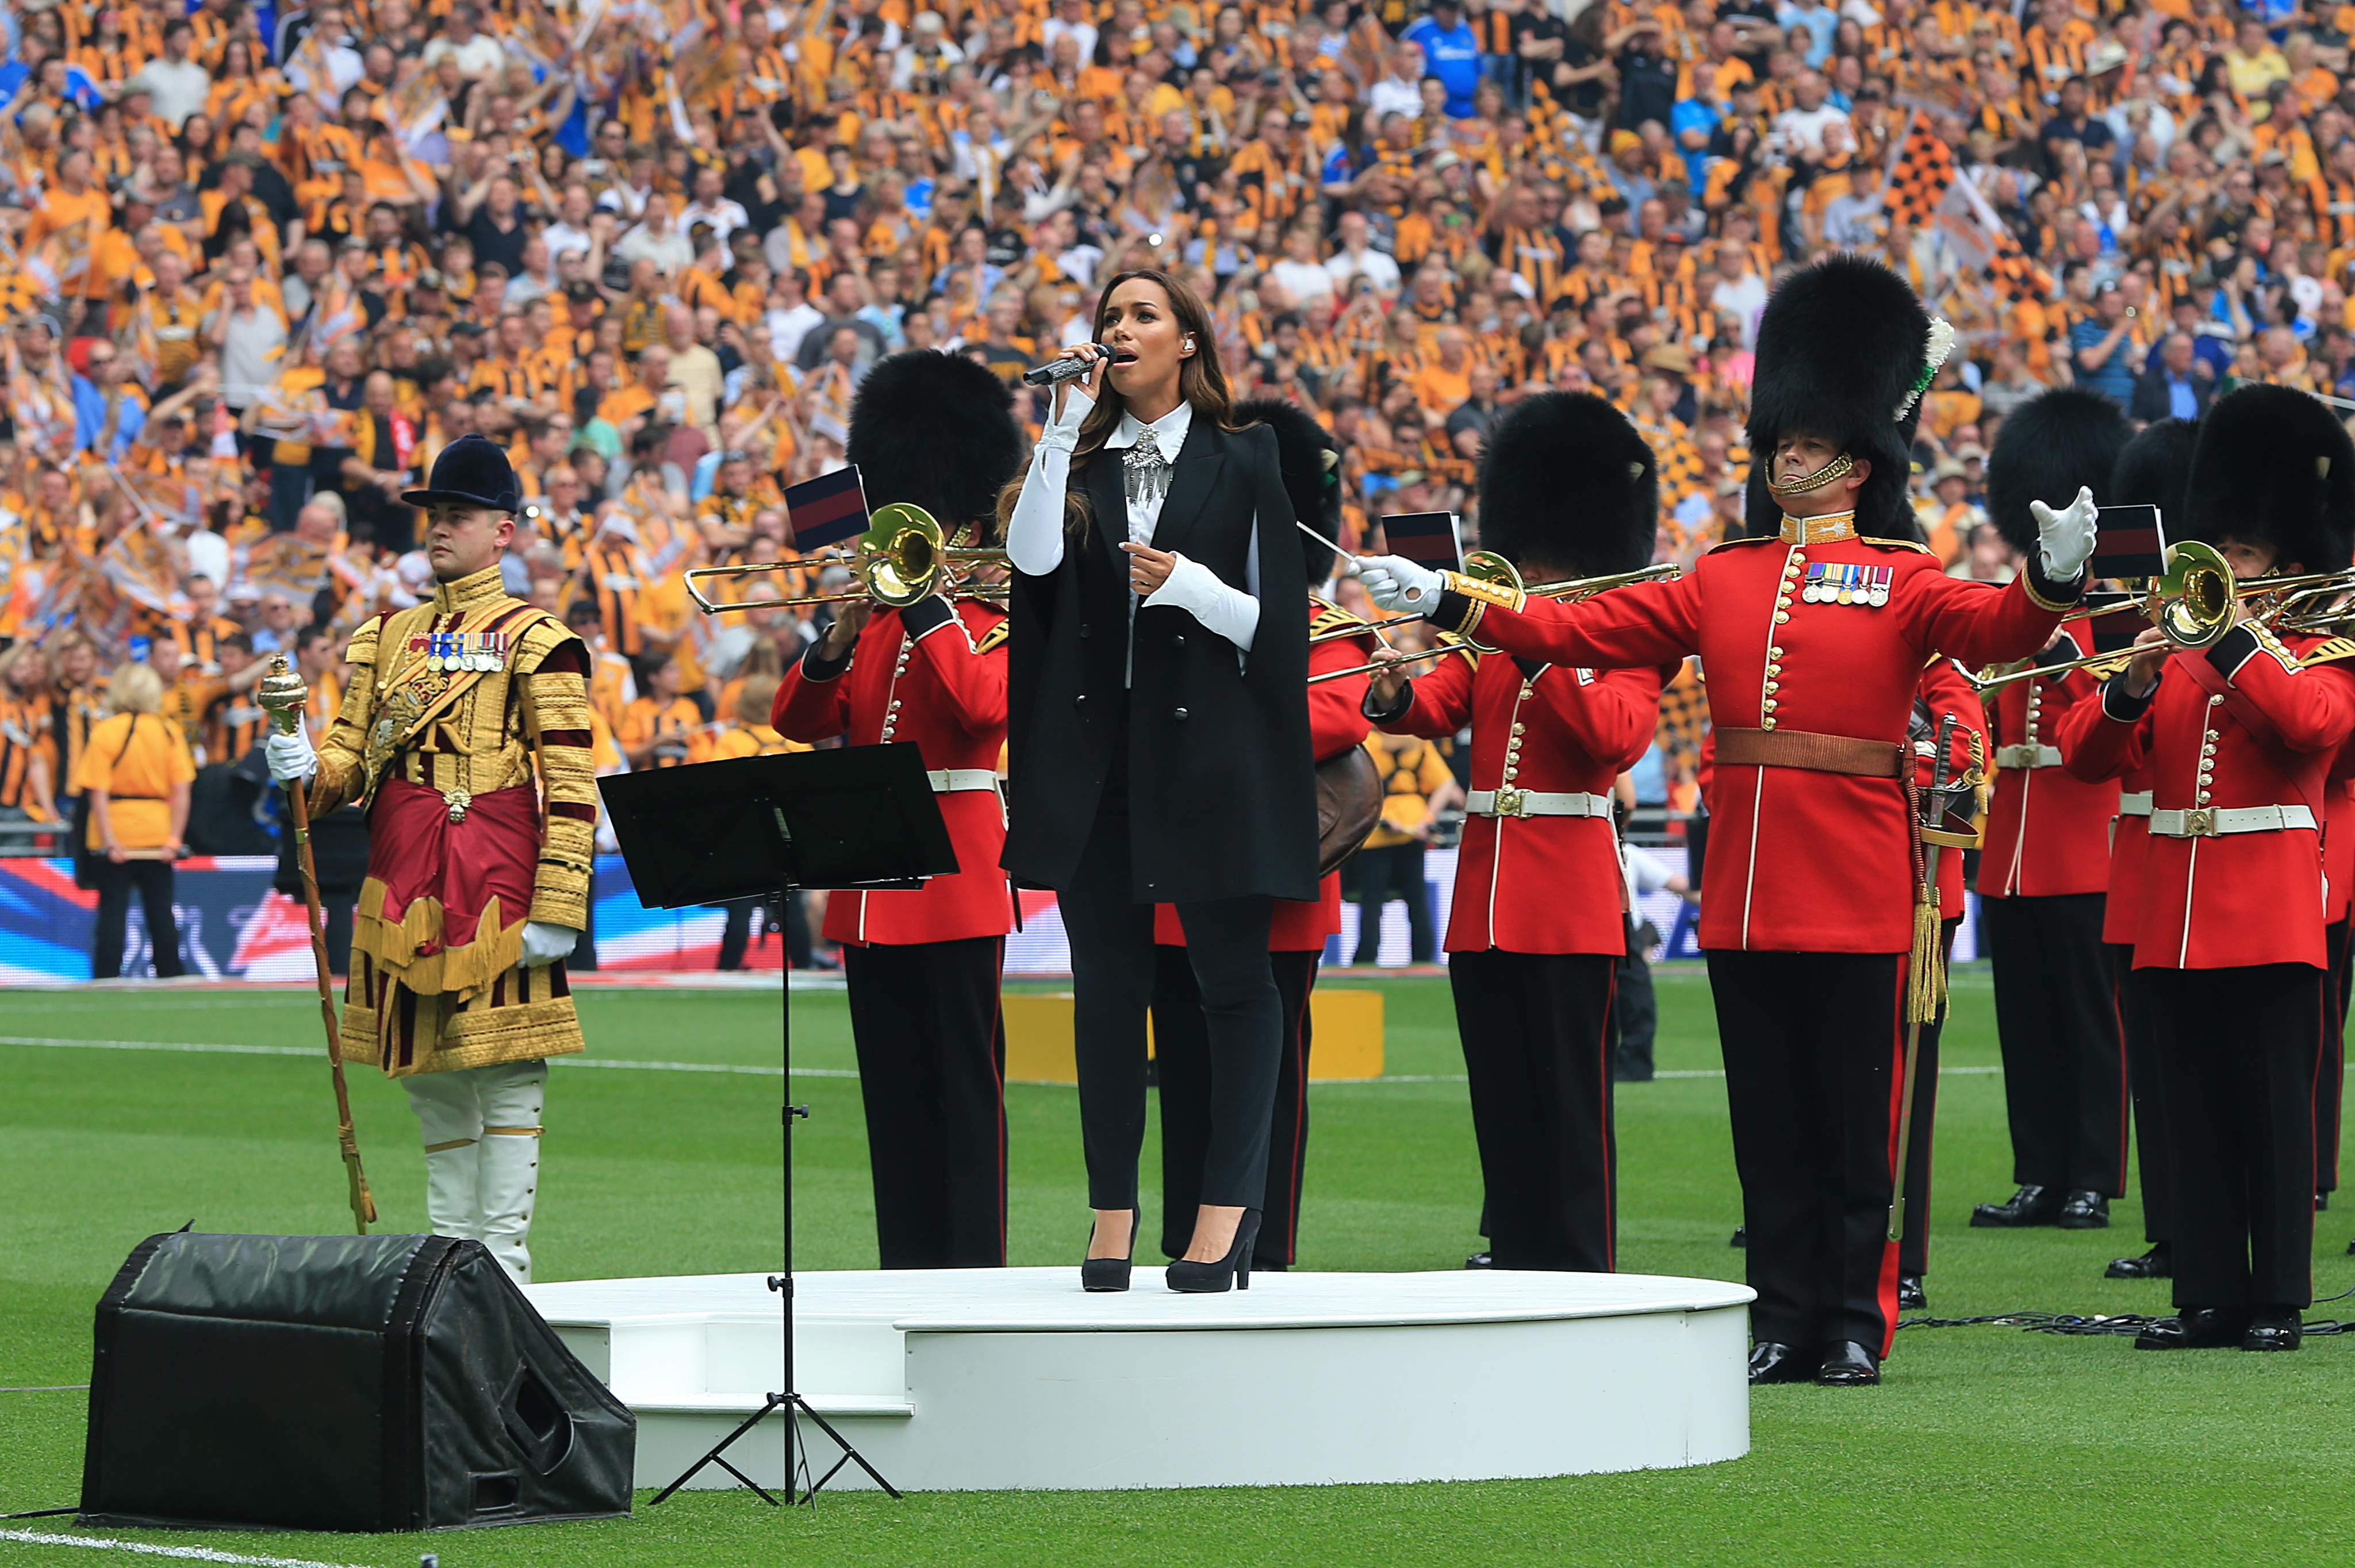 Leona Lewis sings ahead of the 2014 FA Cup final